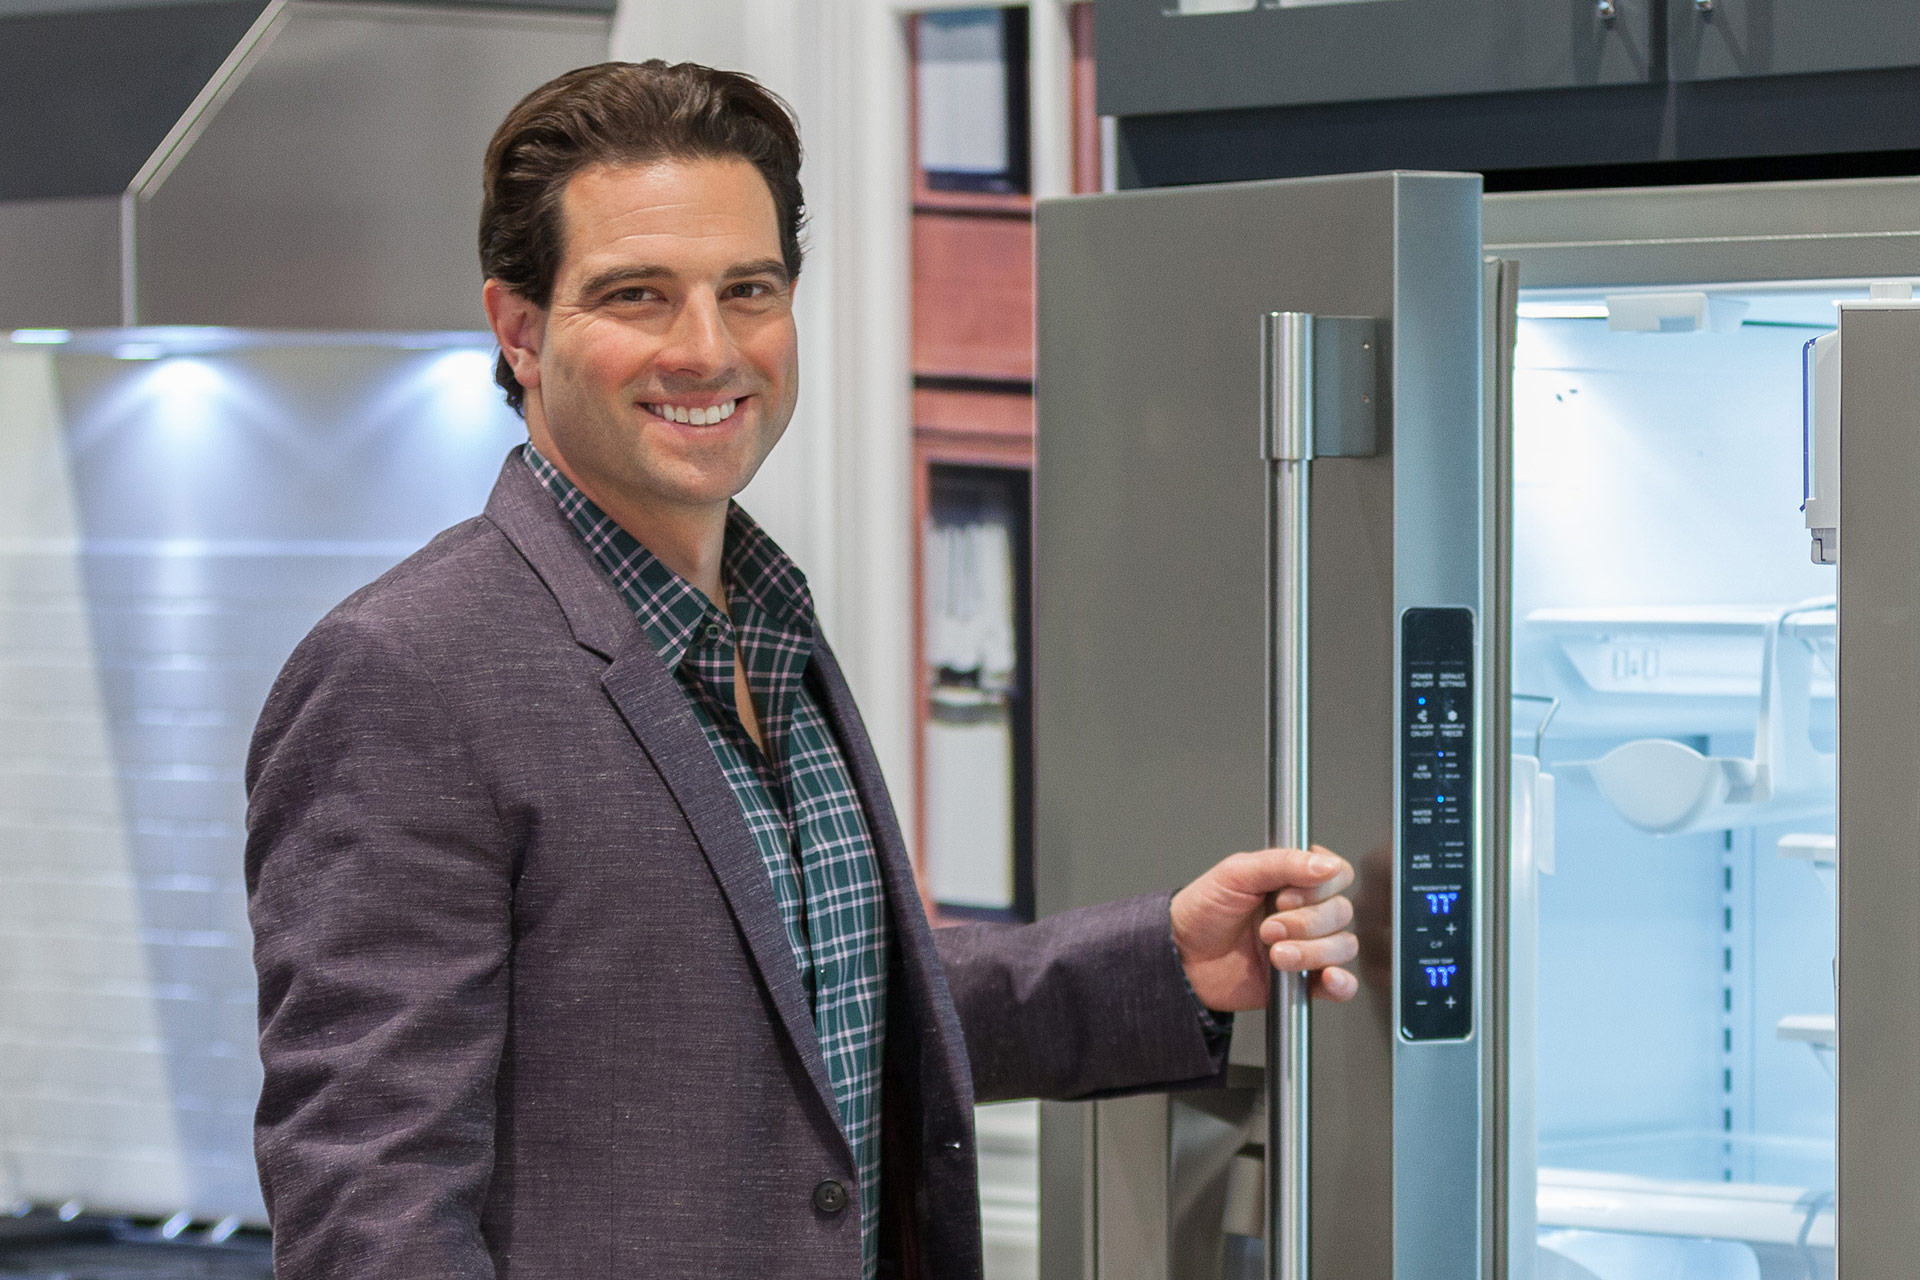 HGTV's Scott McGillivray, a white male smiling in a grey suit jacket opening a stainless steel refrigerator with illuminated white interior in the KBIS 2016 Electrolux exhibit.